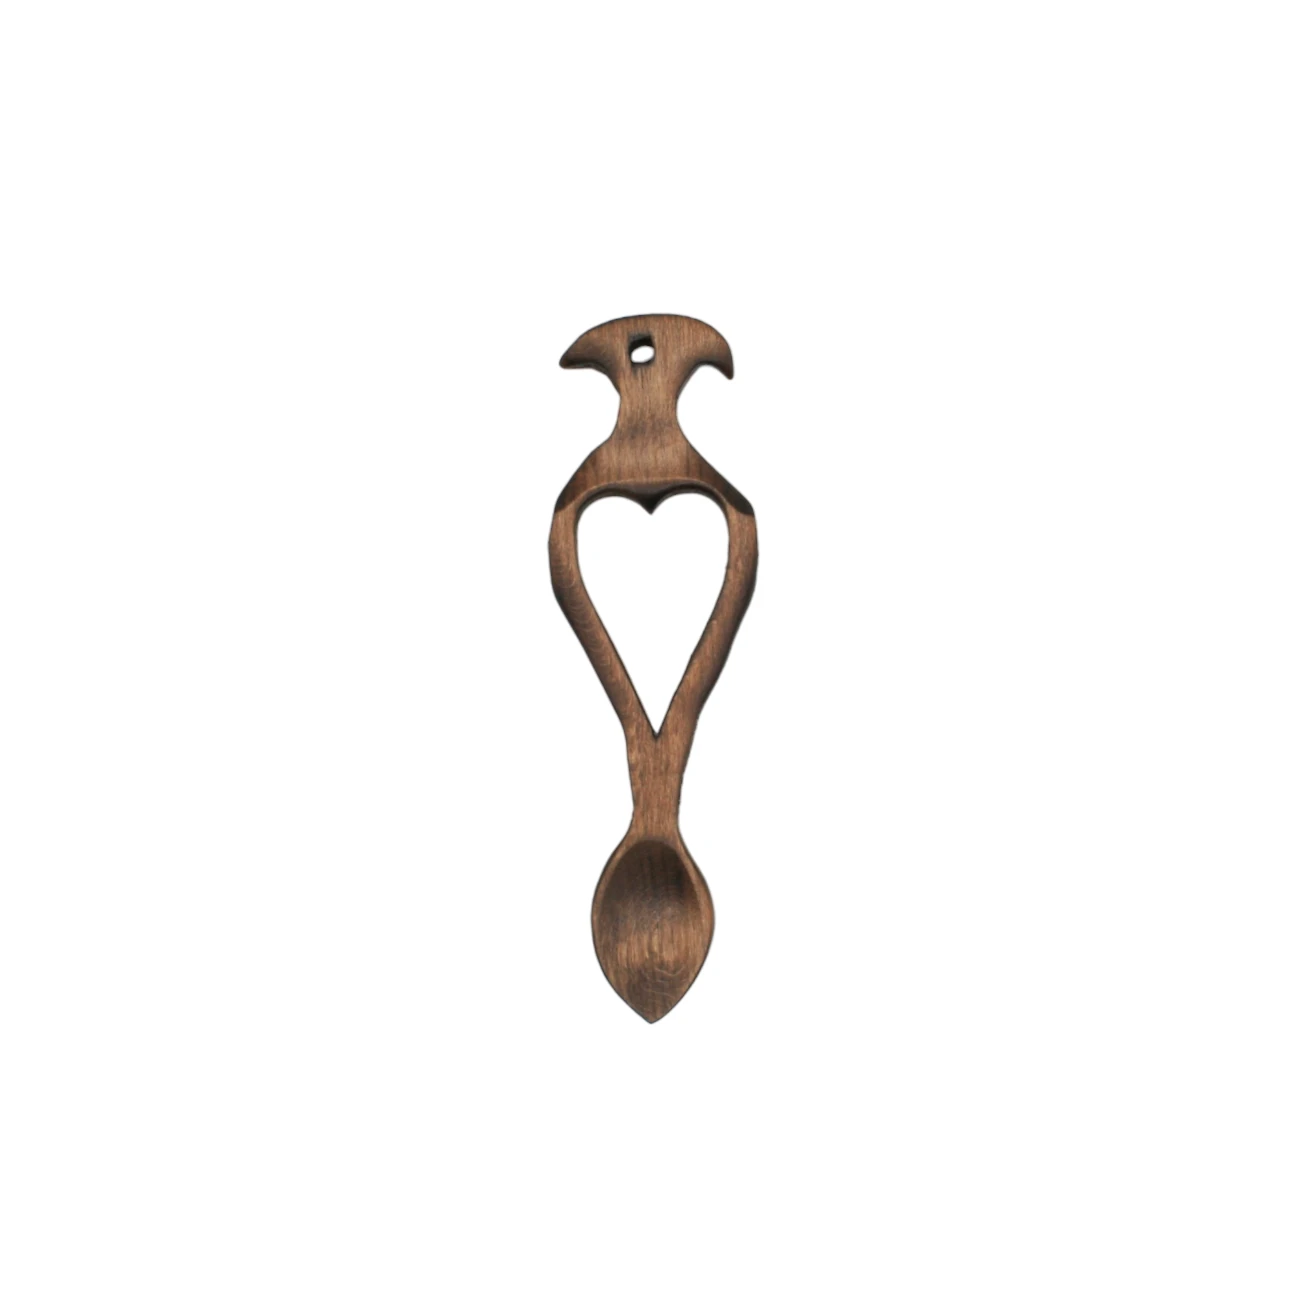 An image of a lovespoon titled Small Heart (3)